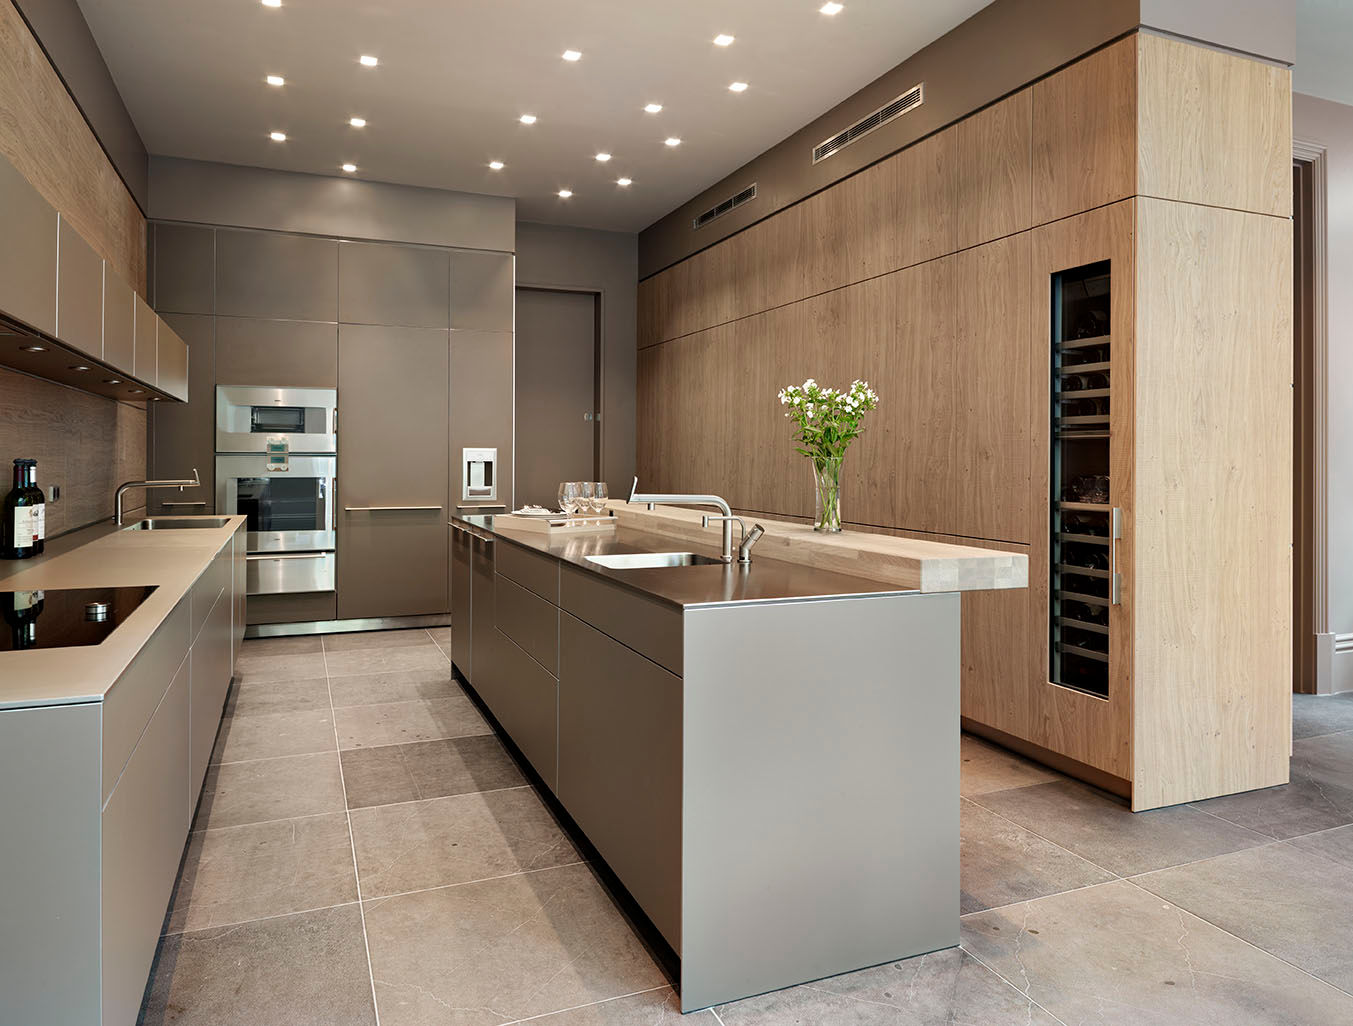 Grand dining Kitchen Architecture Modern kitchen kitchen architecture,bulthaup,bulthaup b3,bespoke kitchen,contemporary kitchen,kitchen island,breakfast bar,integrated kitchen,integrated appliance,wine cooler,gagganau,sociable living